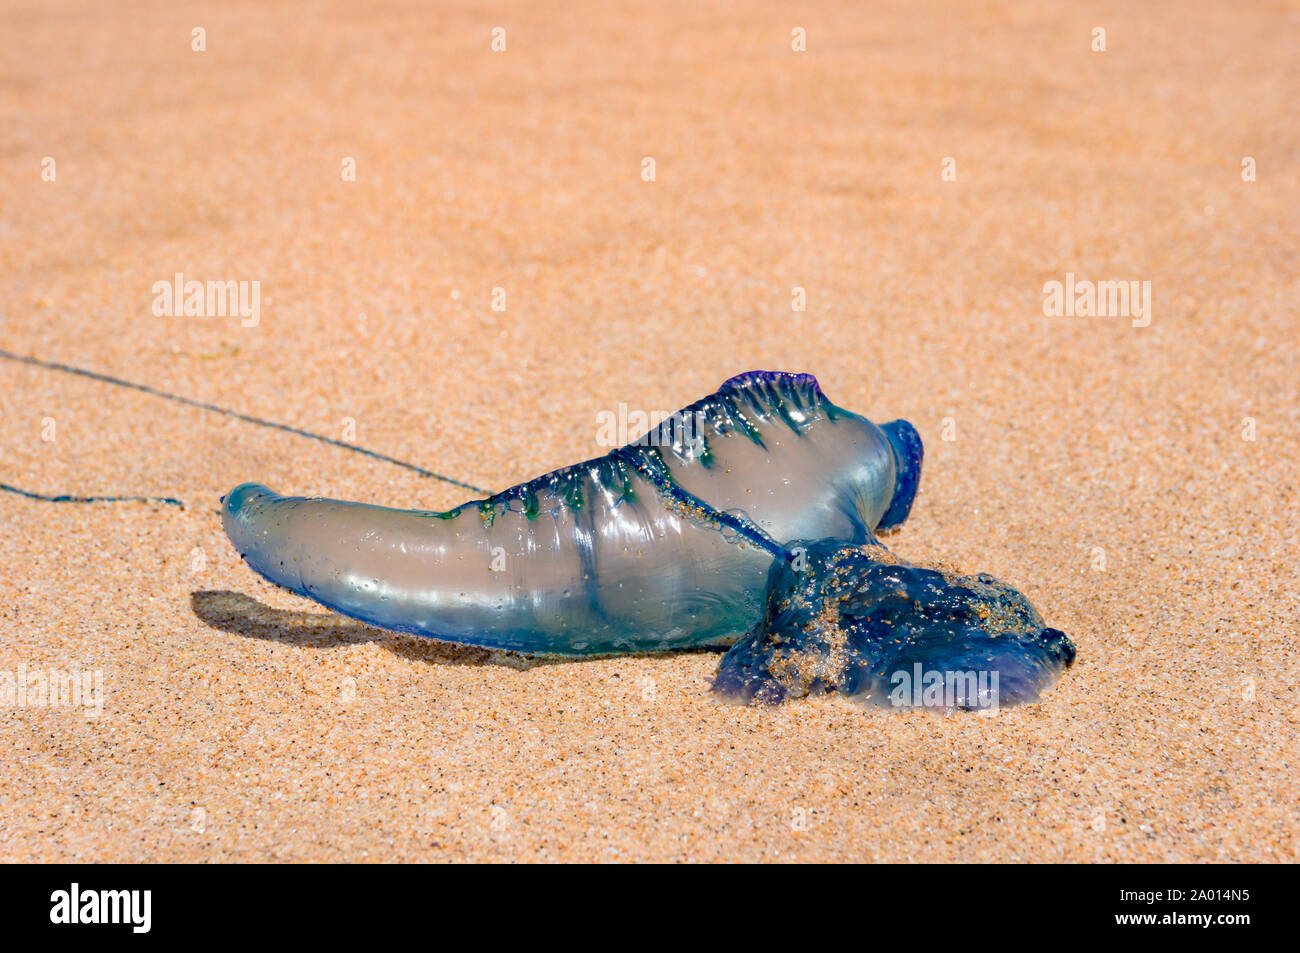 Blue bottle, Portuguese man of war, or floating terror jellyfish laying on a sandy shore. Close up, macro Stock Photo